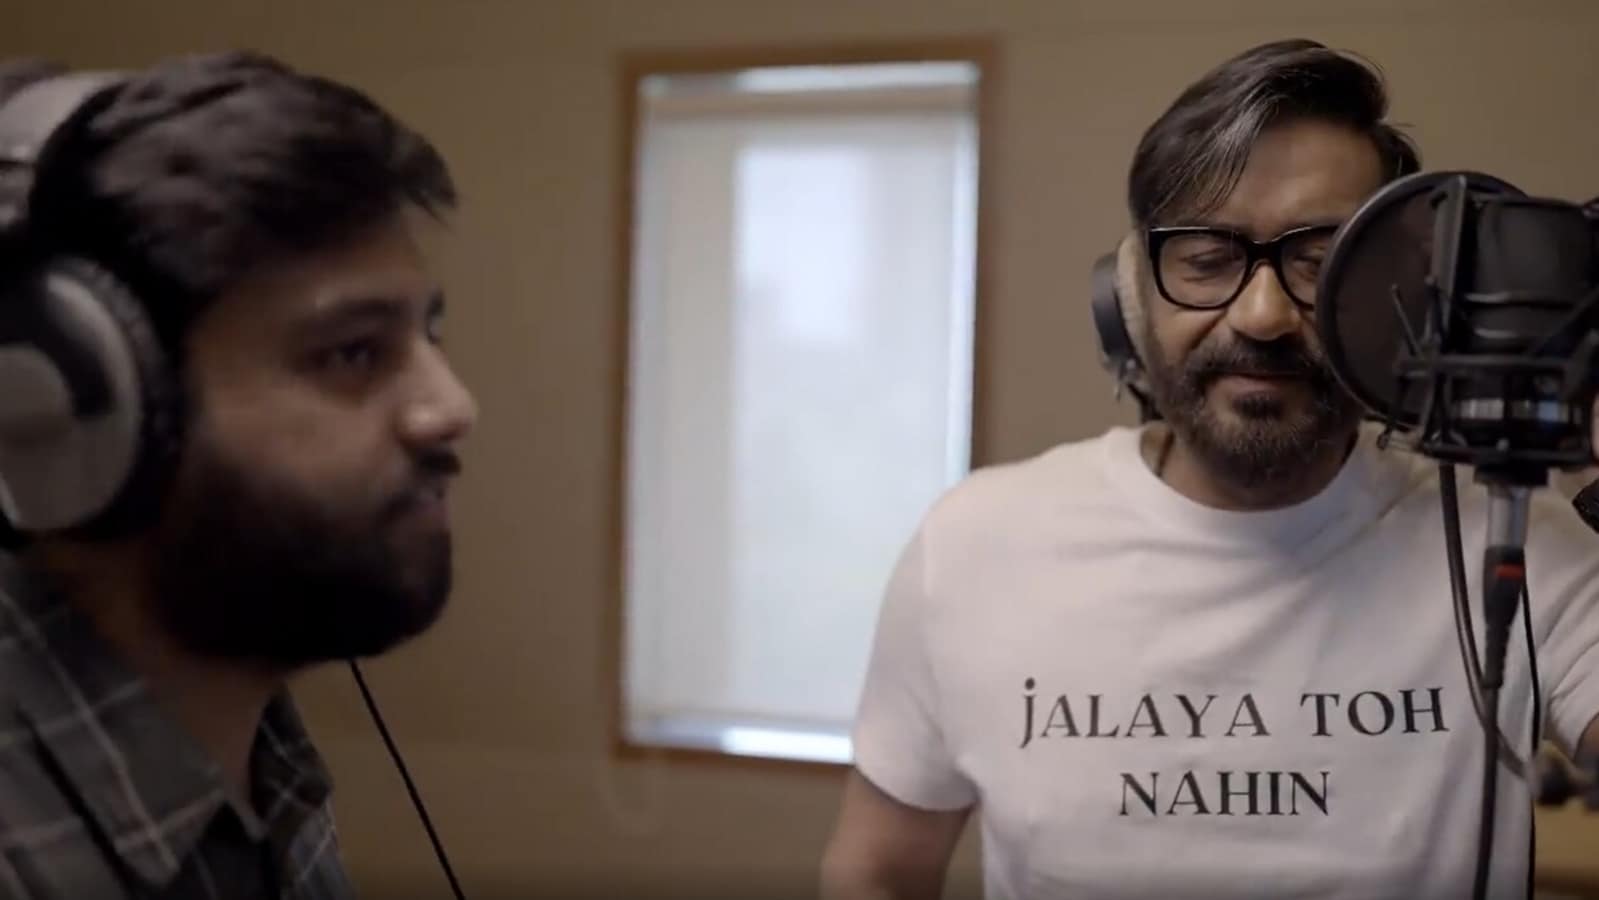 Ajay Devgn turns rapper, mouths Runway 34 line in new video with Yashraj Mukhate; fans love his new avatar. Watch